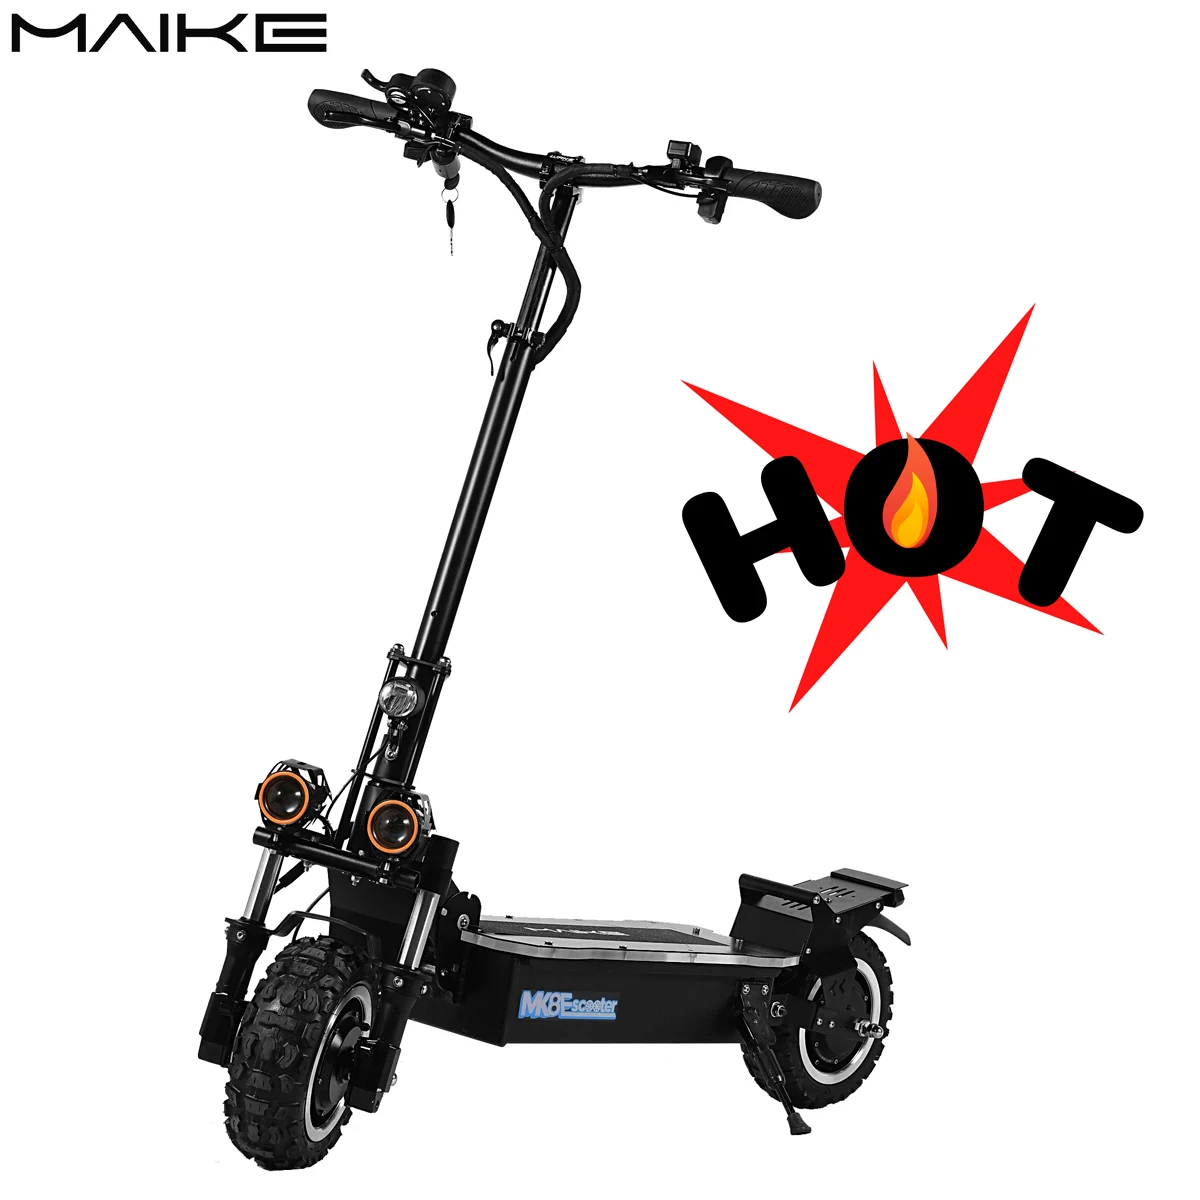 

Hot maike mk8 3200w dual motor off road 11inch fat tire motorcycle electric scooter for adults